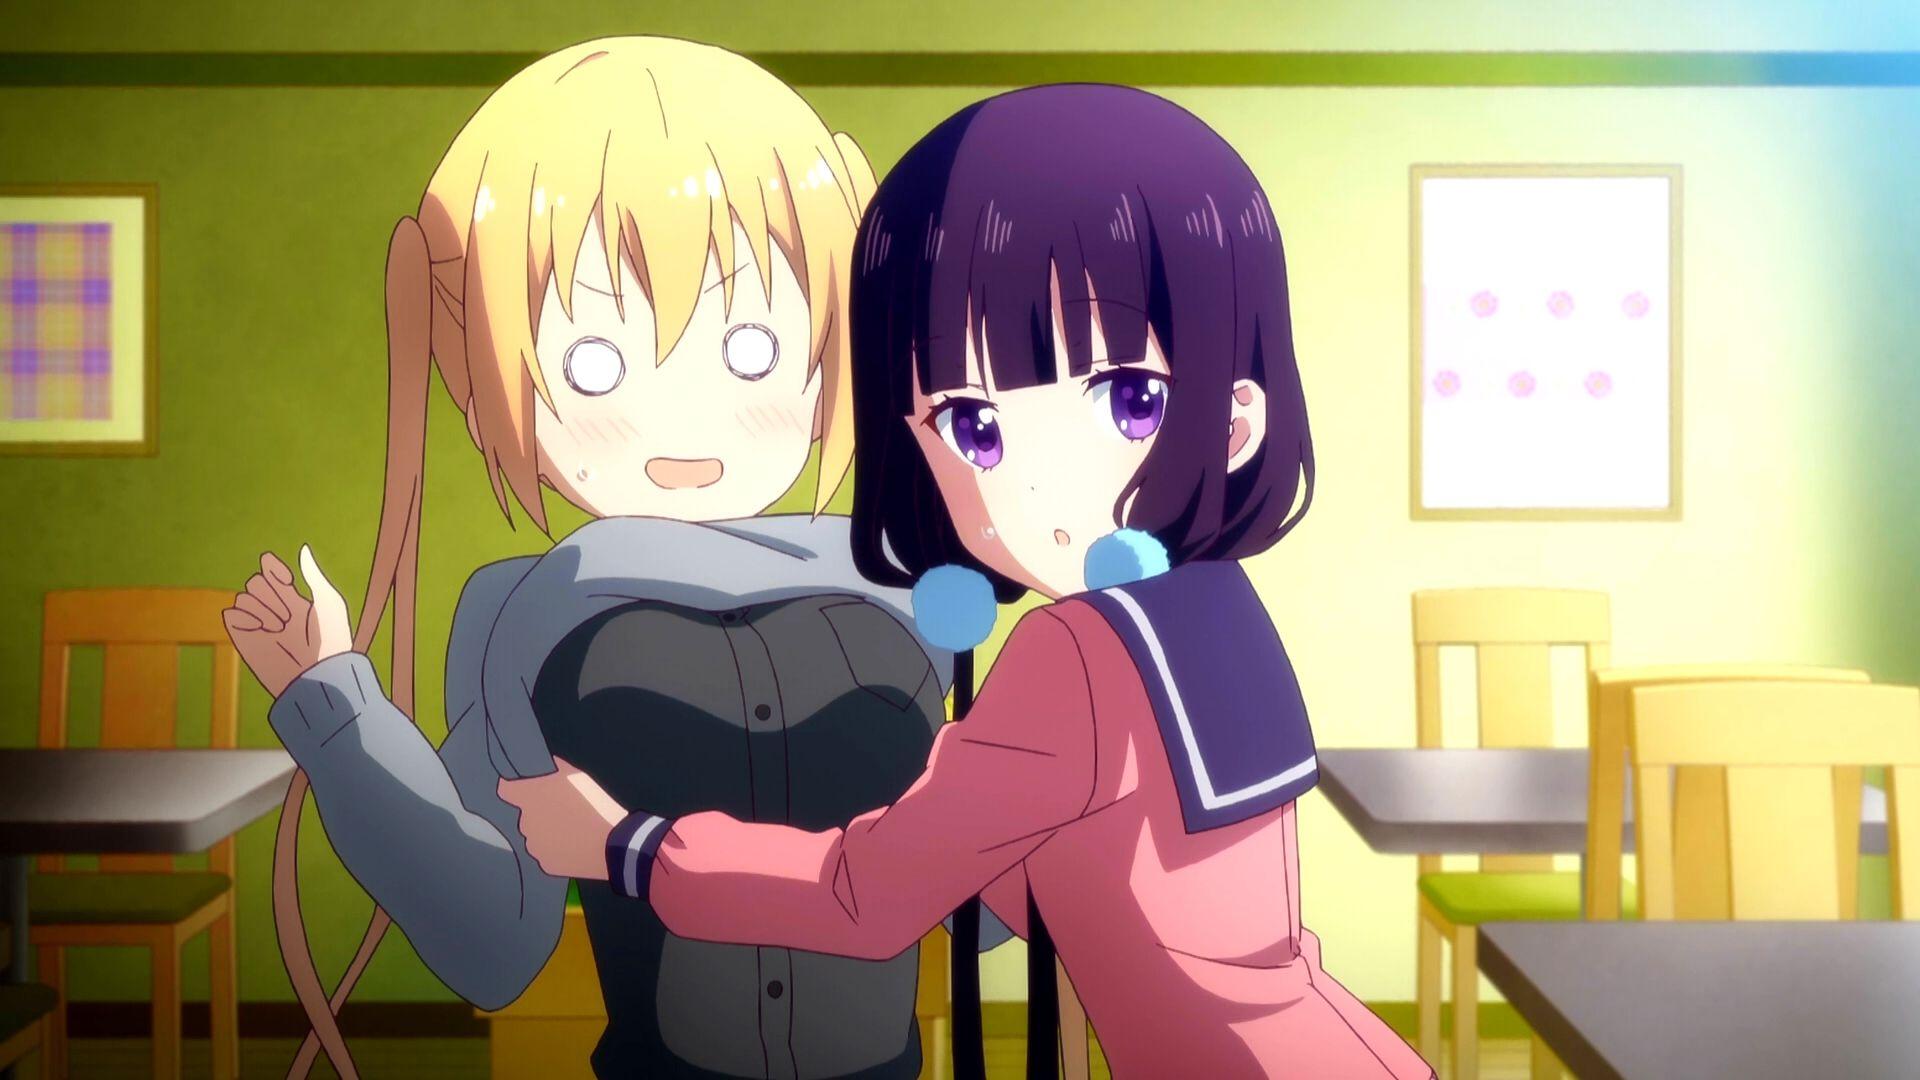 Spoilers Blend S 2 discussion